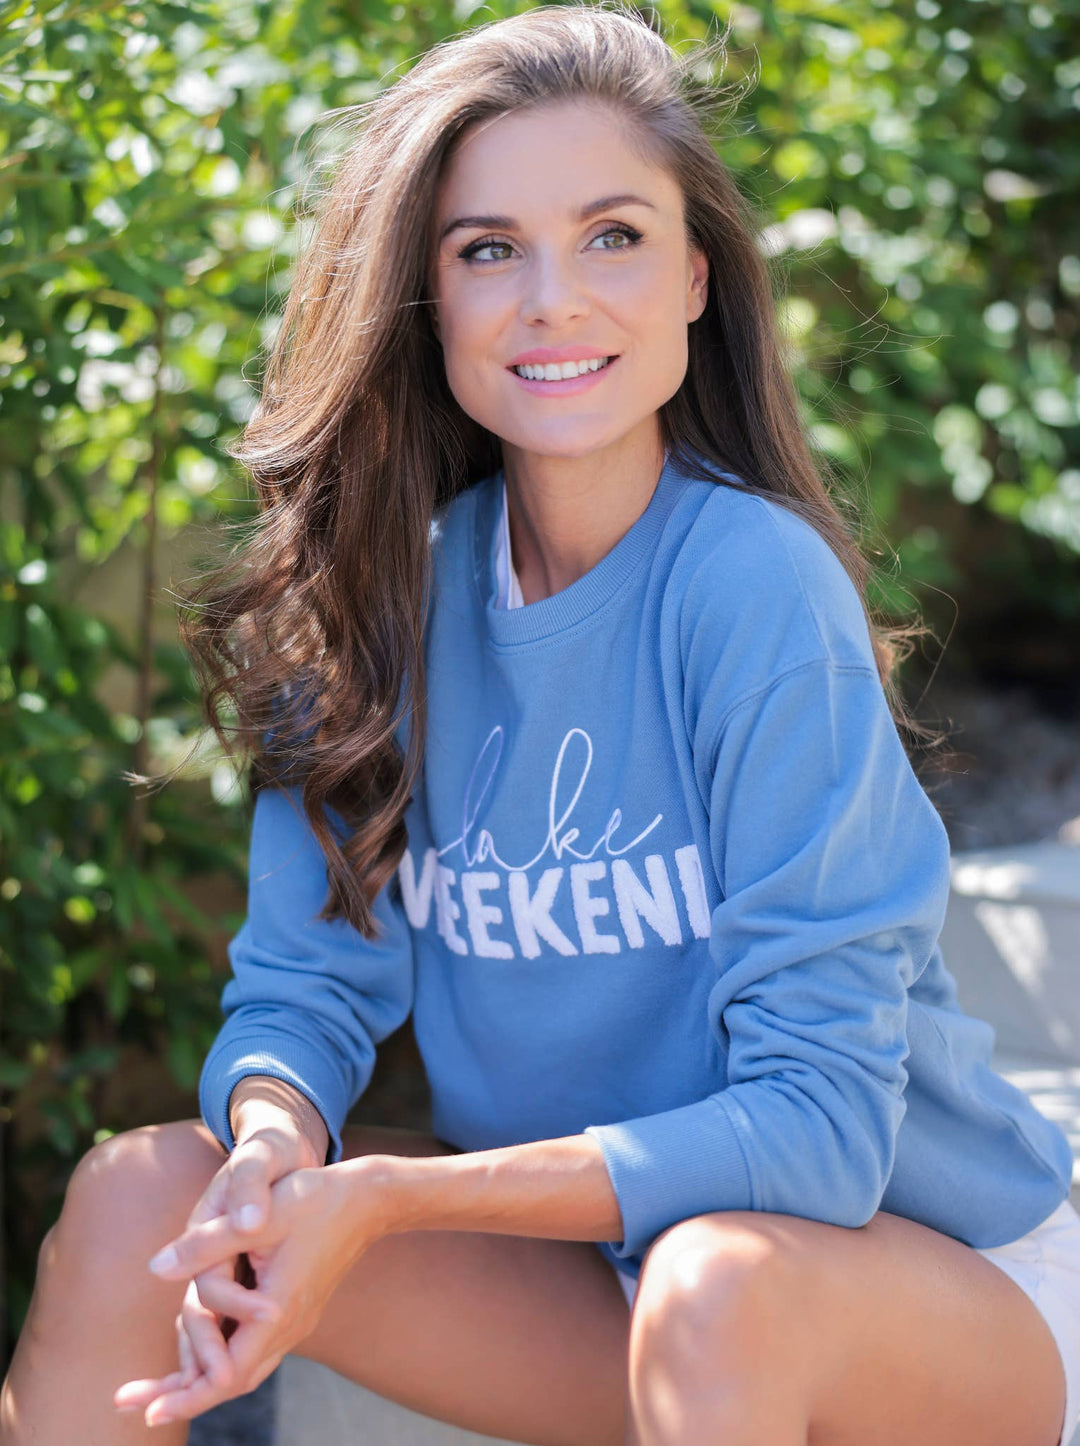 Lake Weekend Graphic Pullover in Water Blue